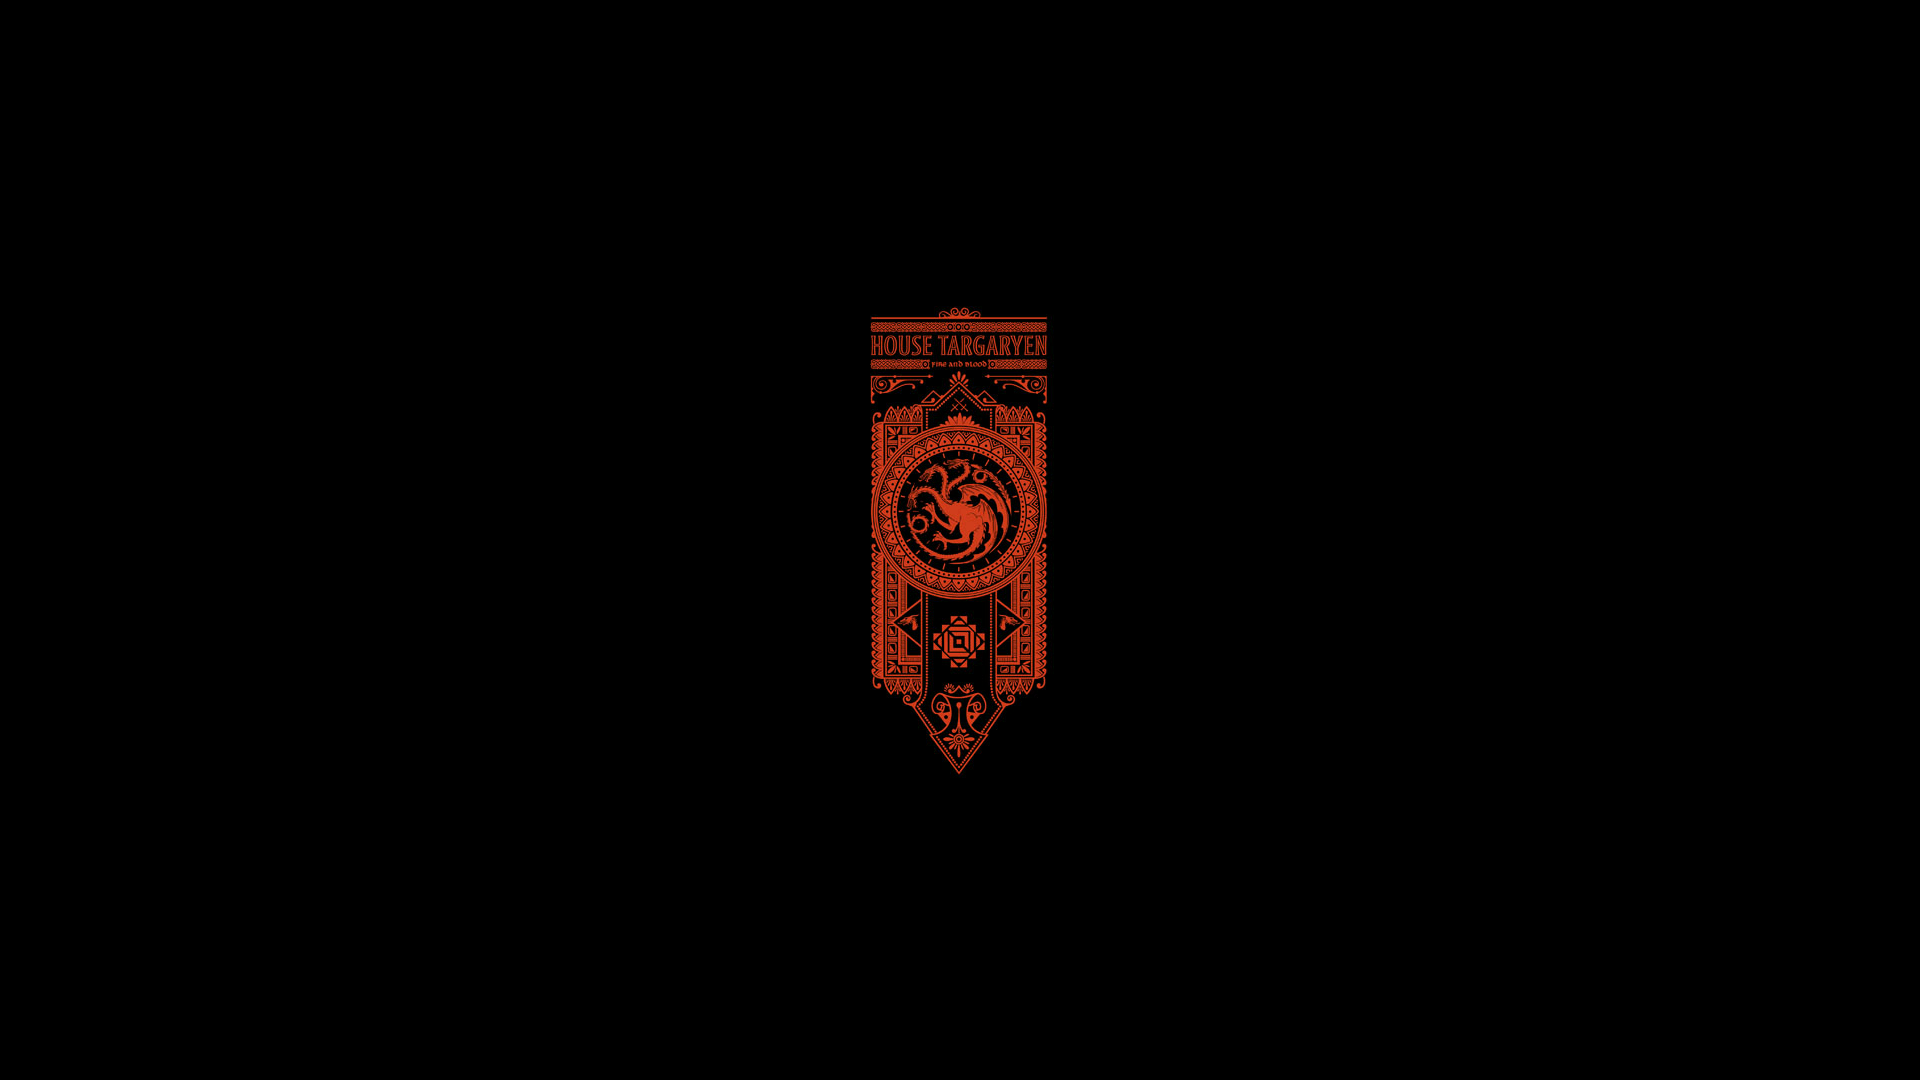 Game of Thrones Song of Ice and Fire Targaryen Minimal Black